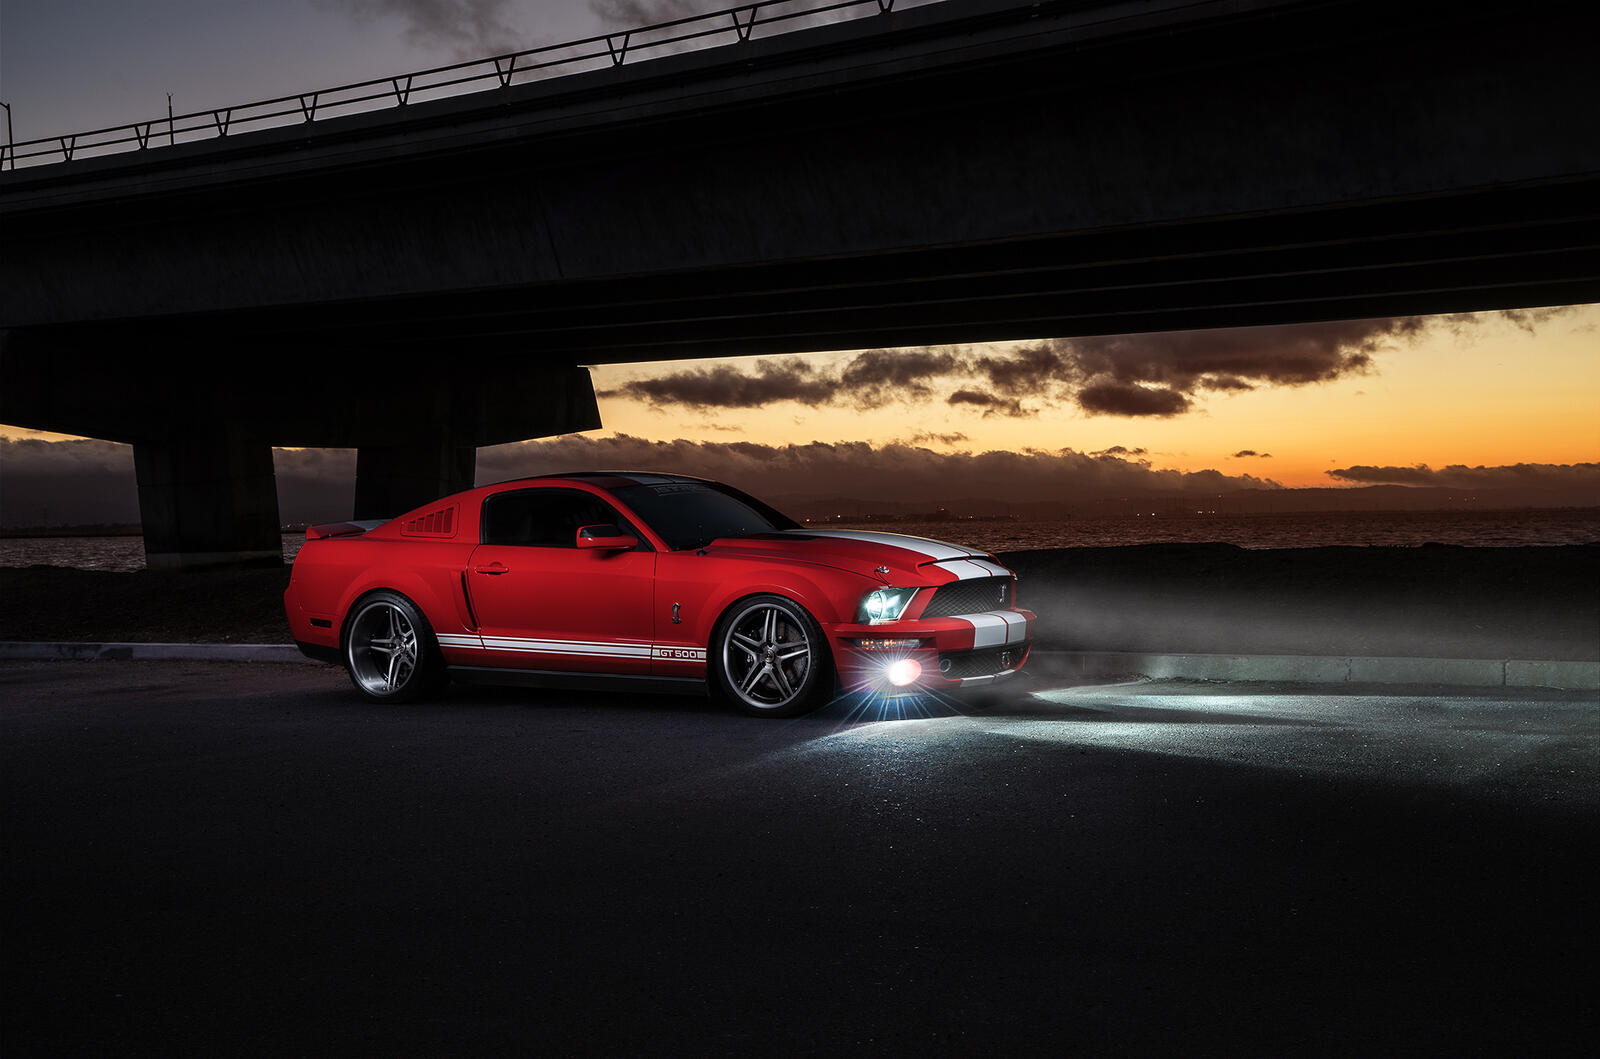 Free photo Ford Mustang red in the evening